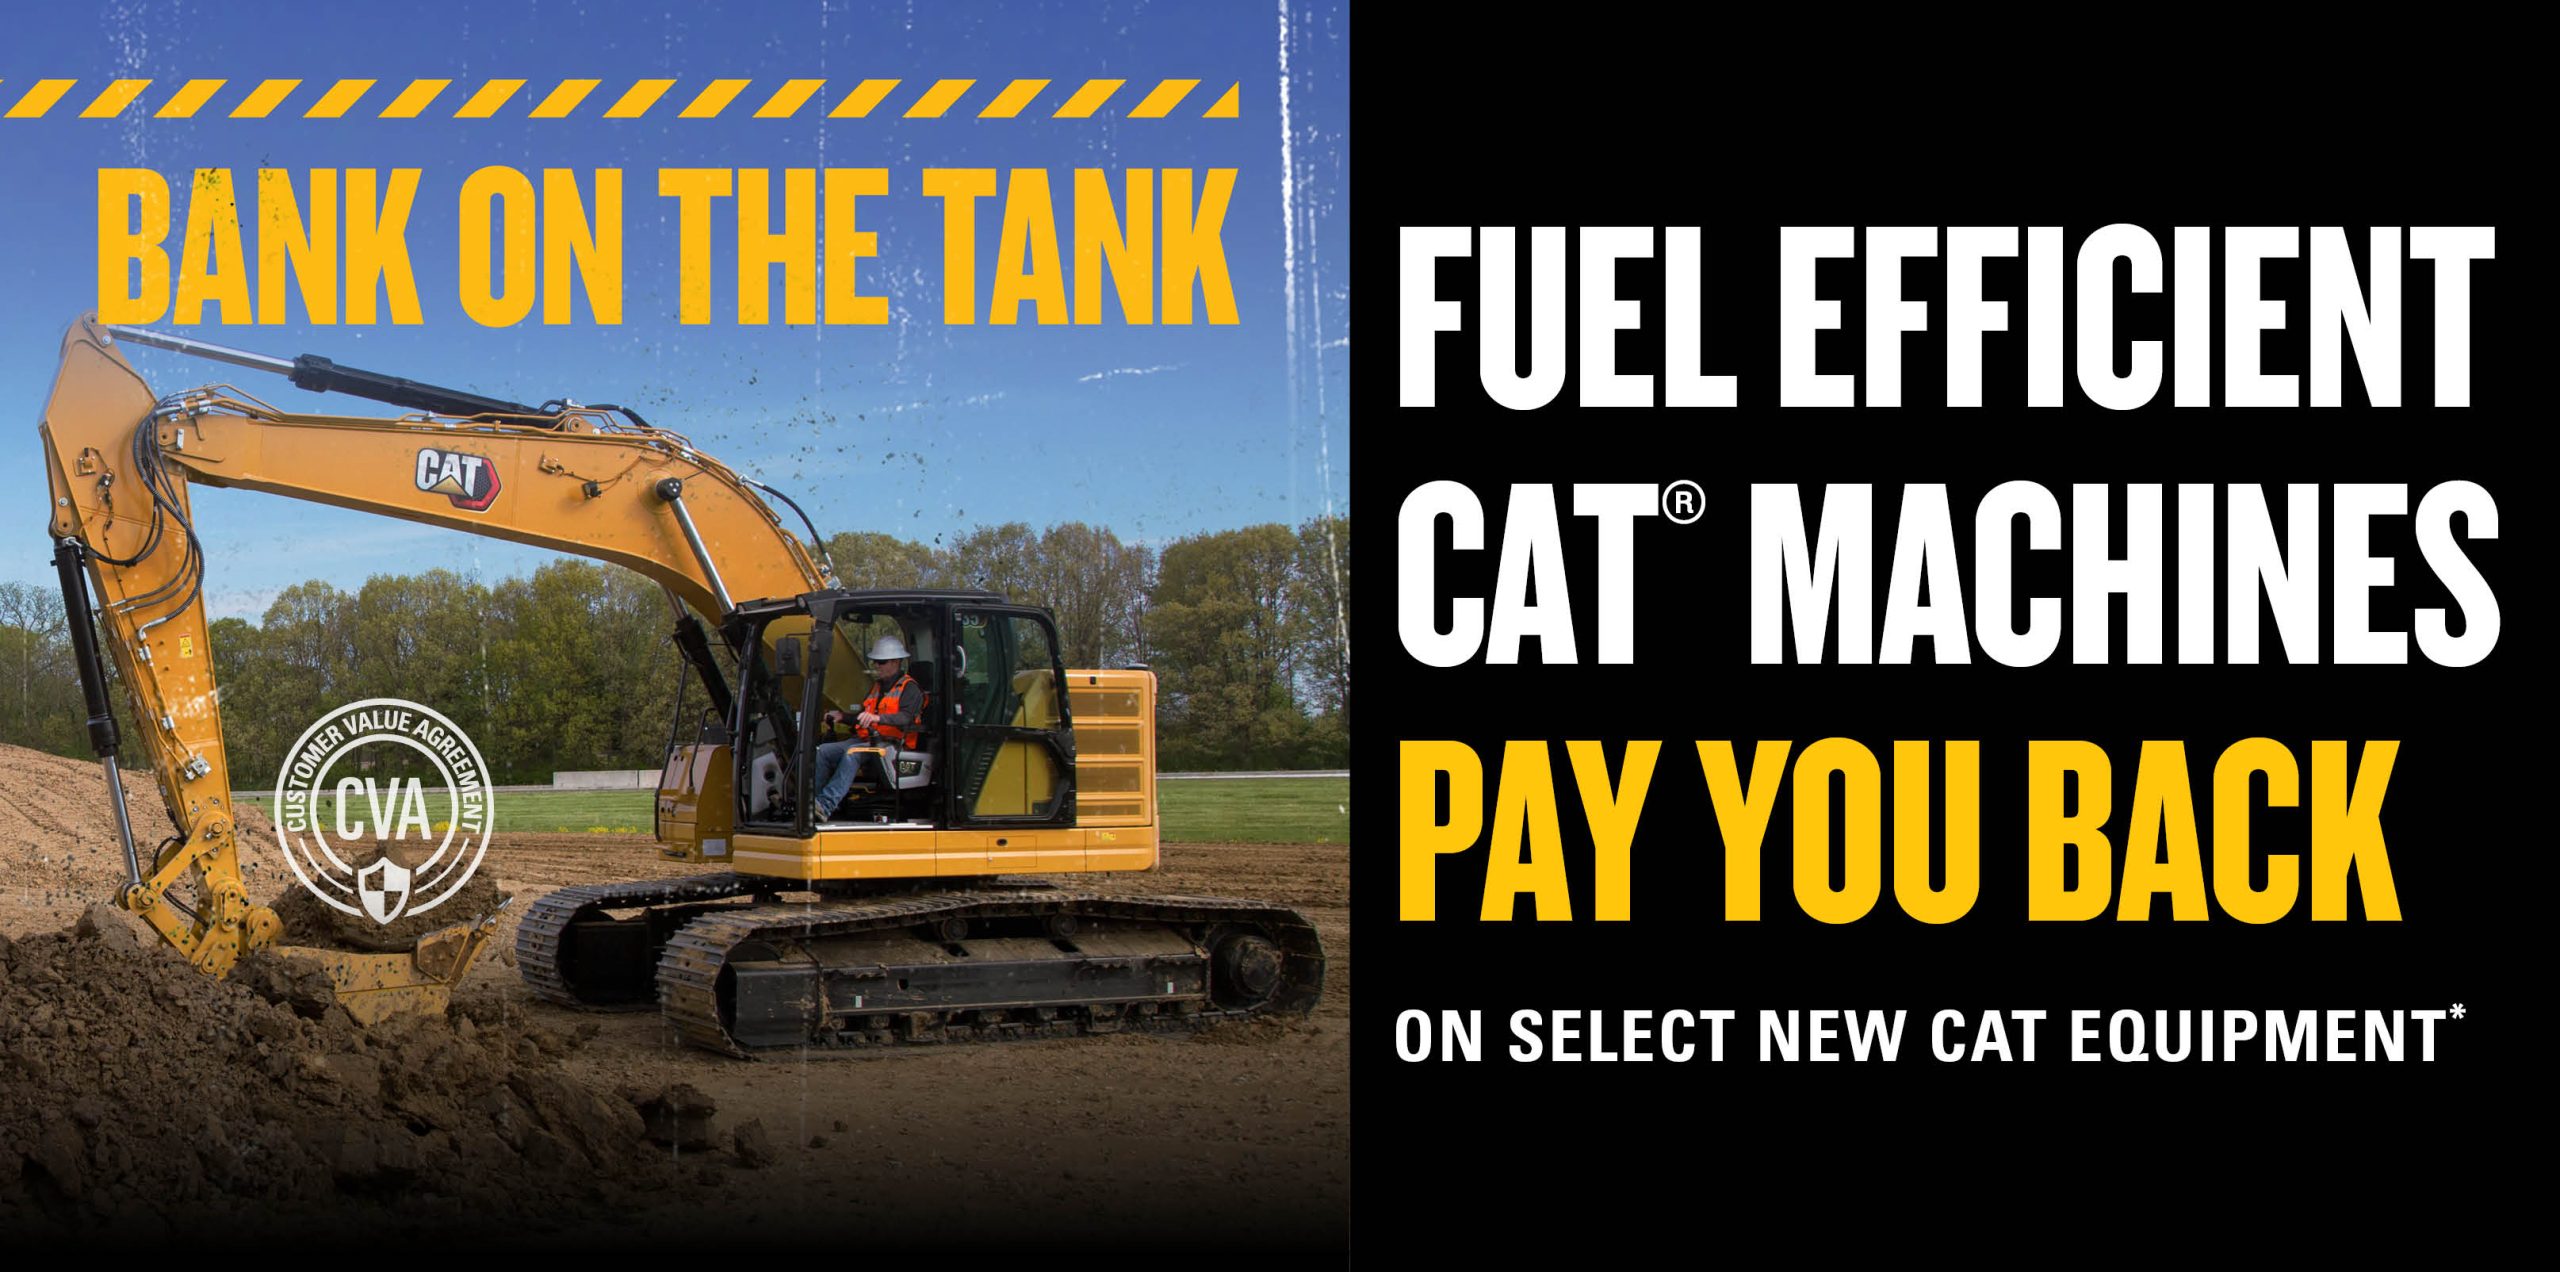 Quinn-Cat-Bank-On-The-Tank-Offer-July-2022